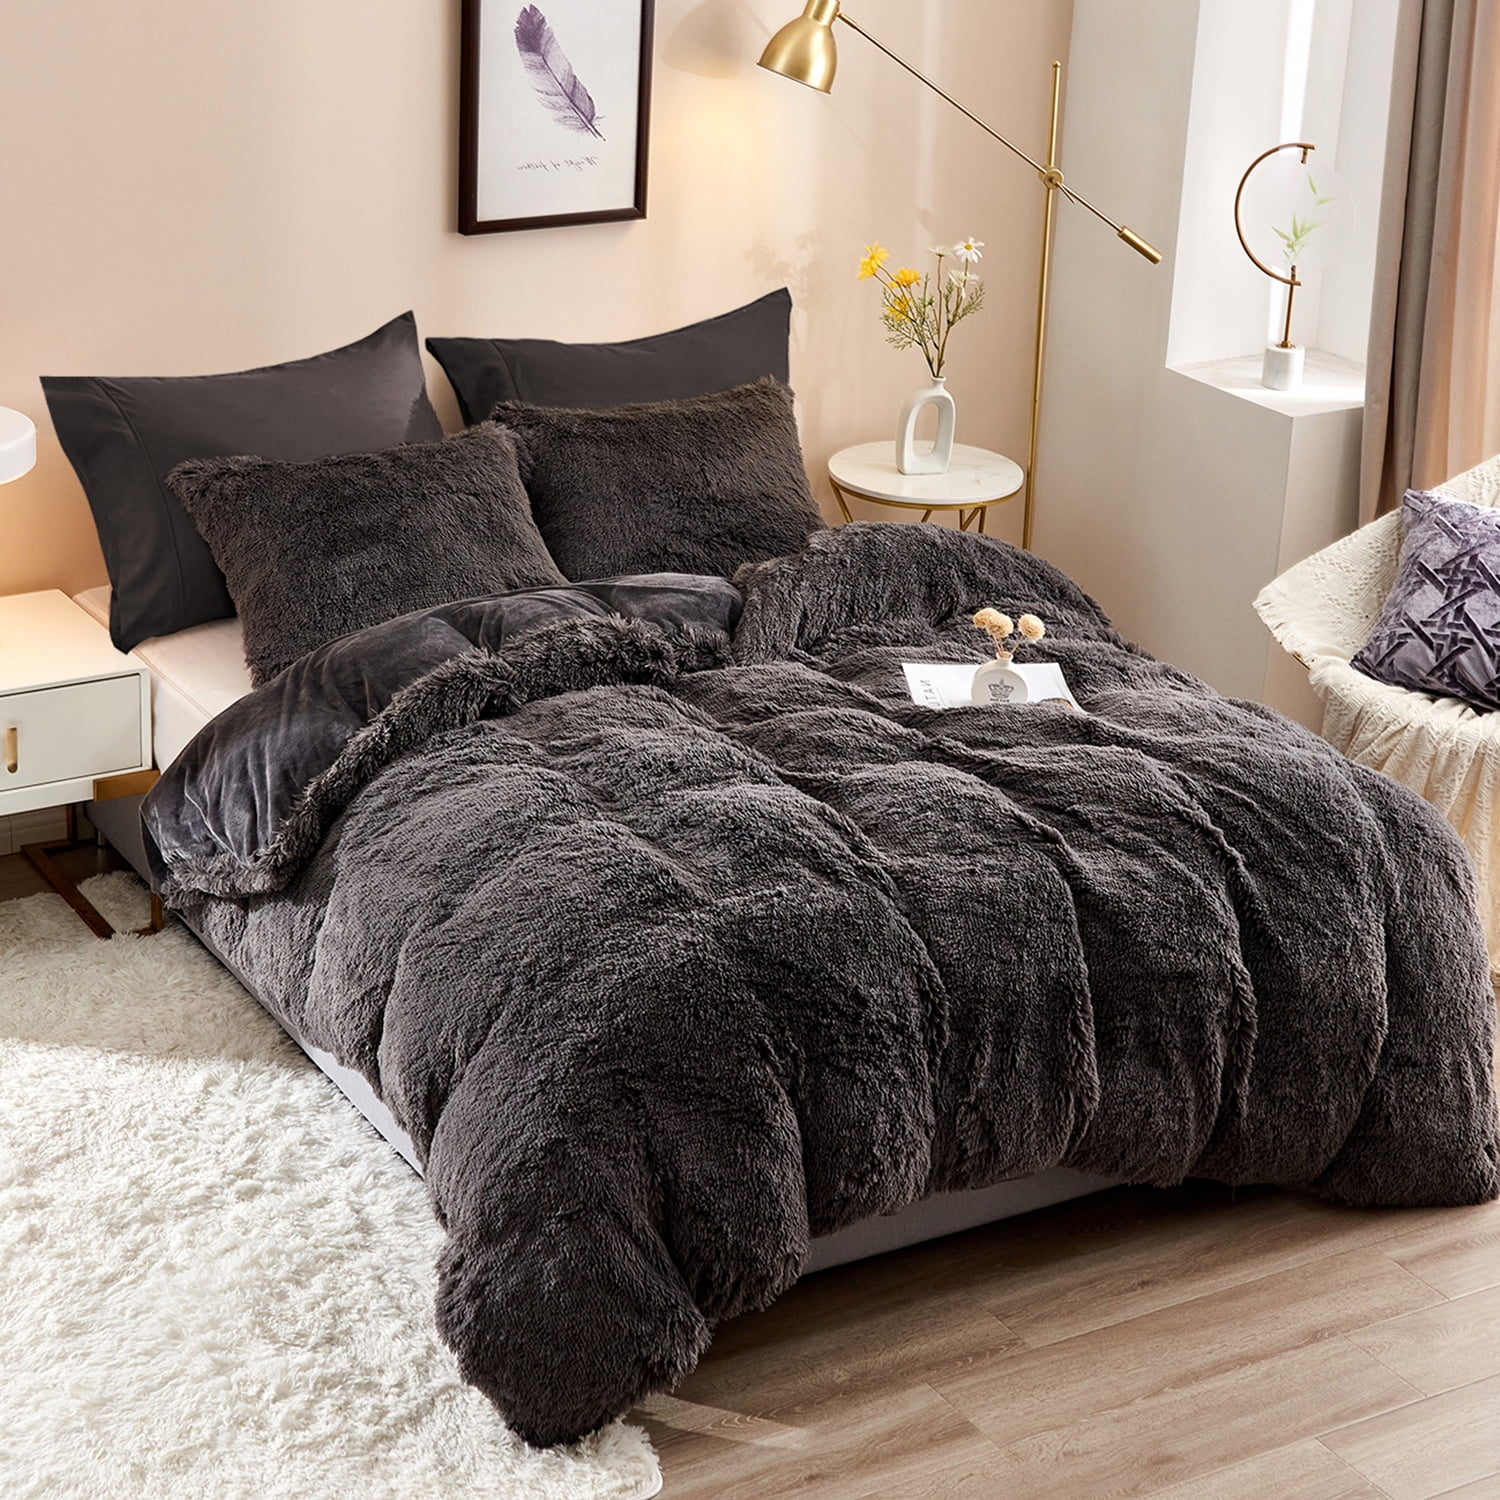 Charcoal Grey, Single Teddy Fleece Fitted Bed Sheet Warm Soft Thermal Plain Charcoal Silver Grey Single Double King Super King Bedding Bedsheet Covers.